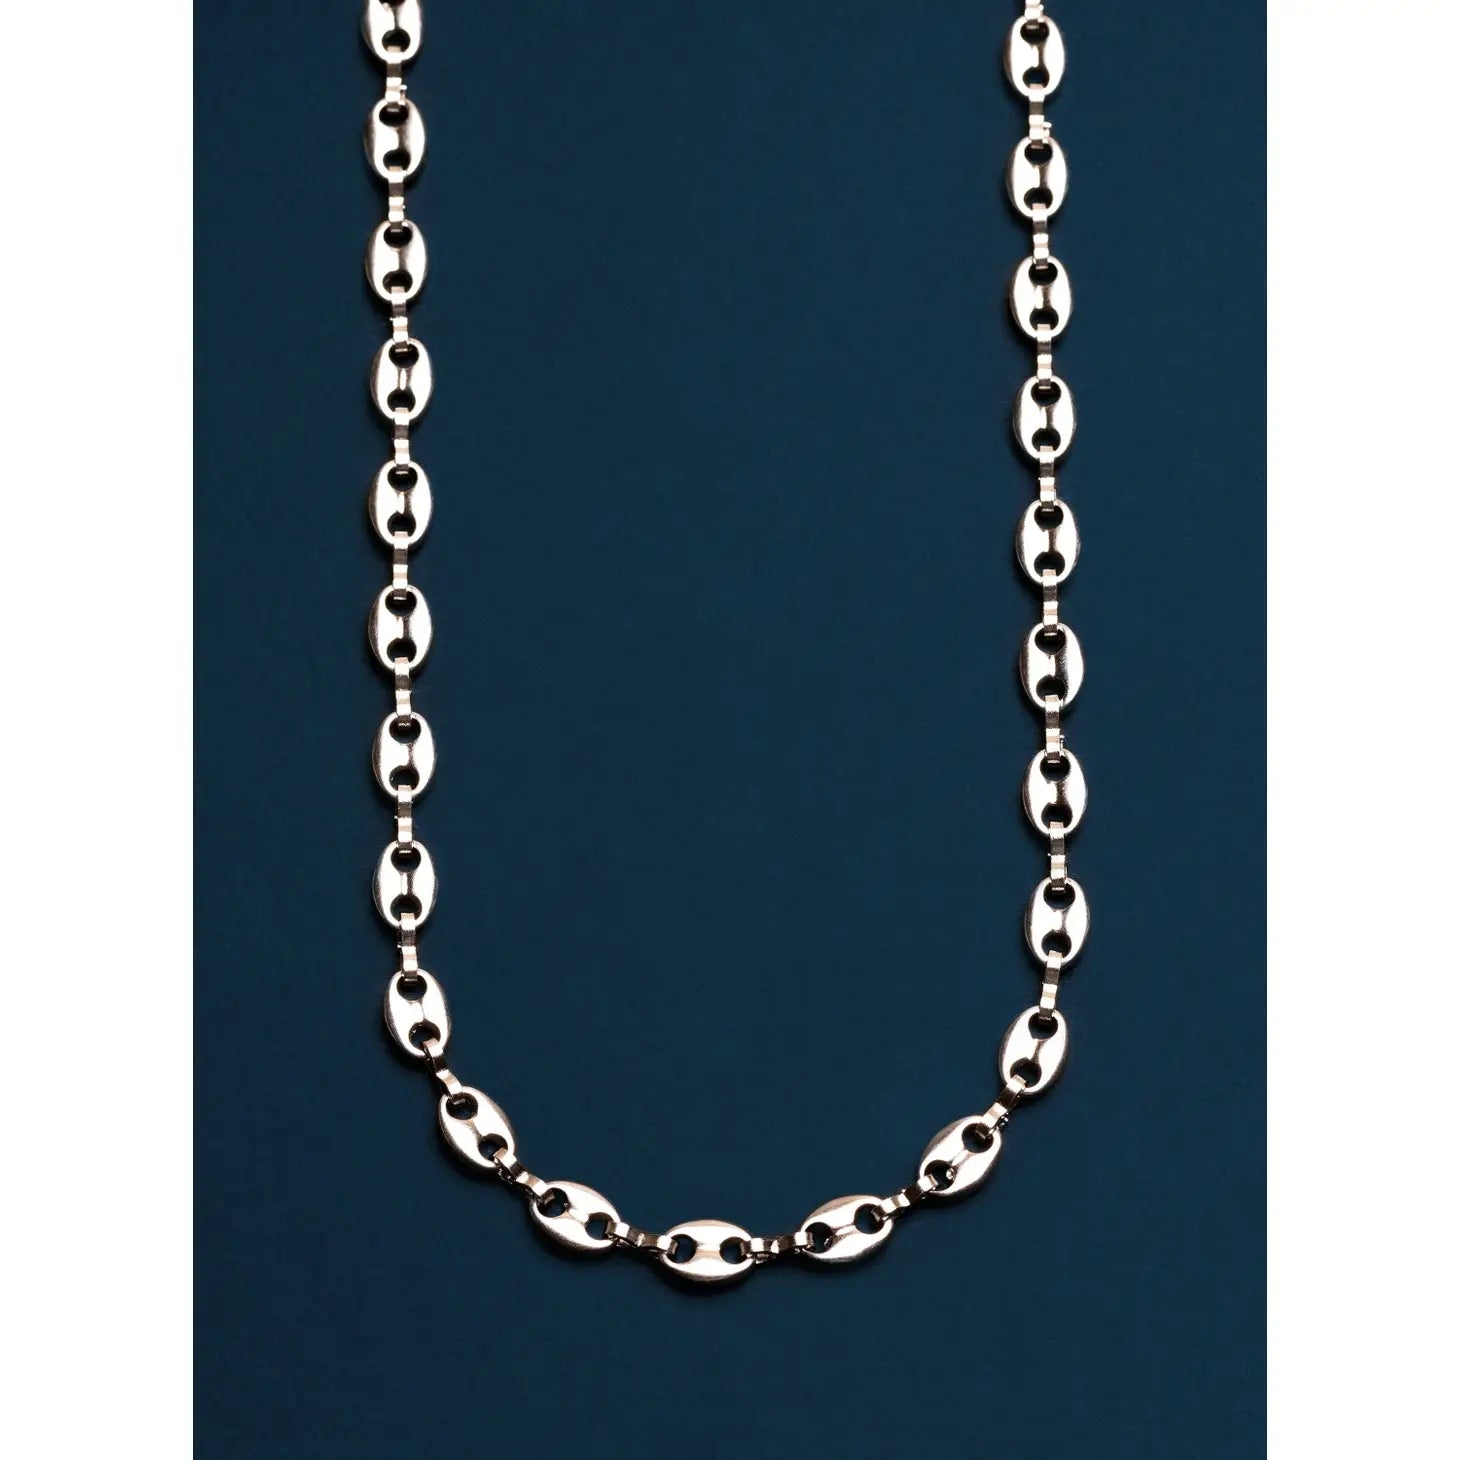 We are all Smith - 5 mm Mariners Chain Necklace 20"